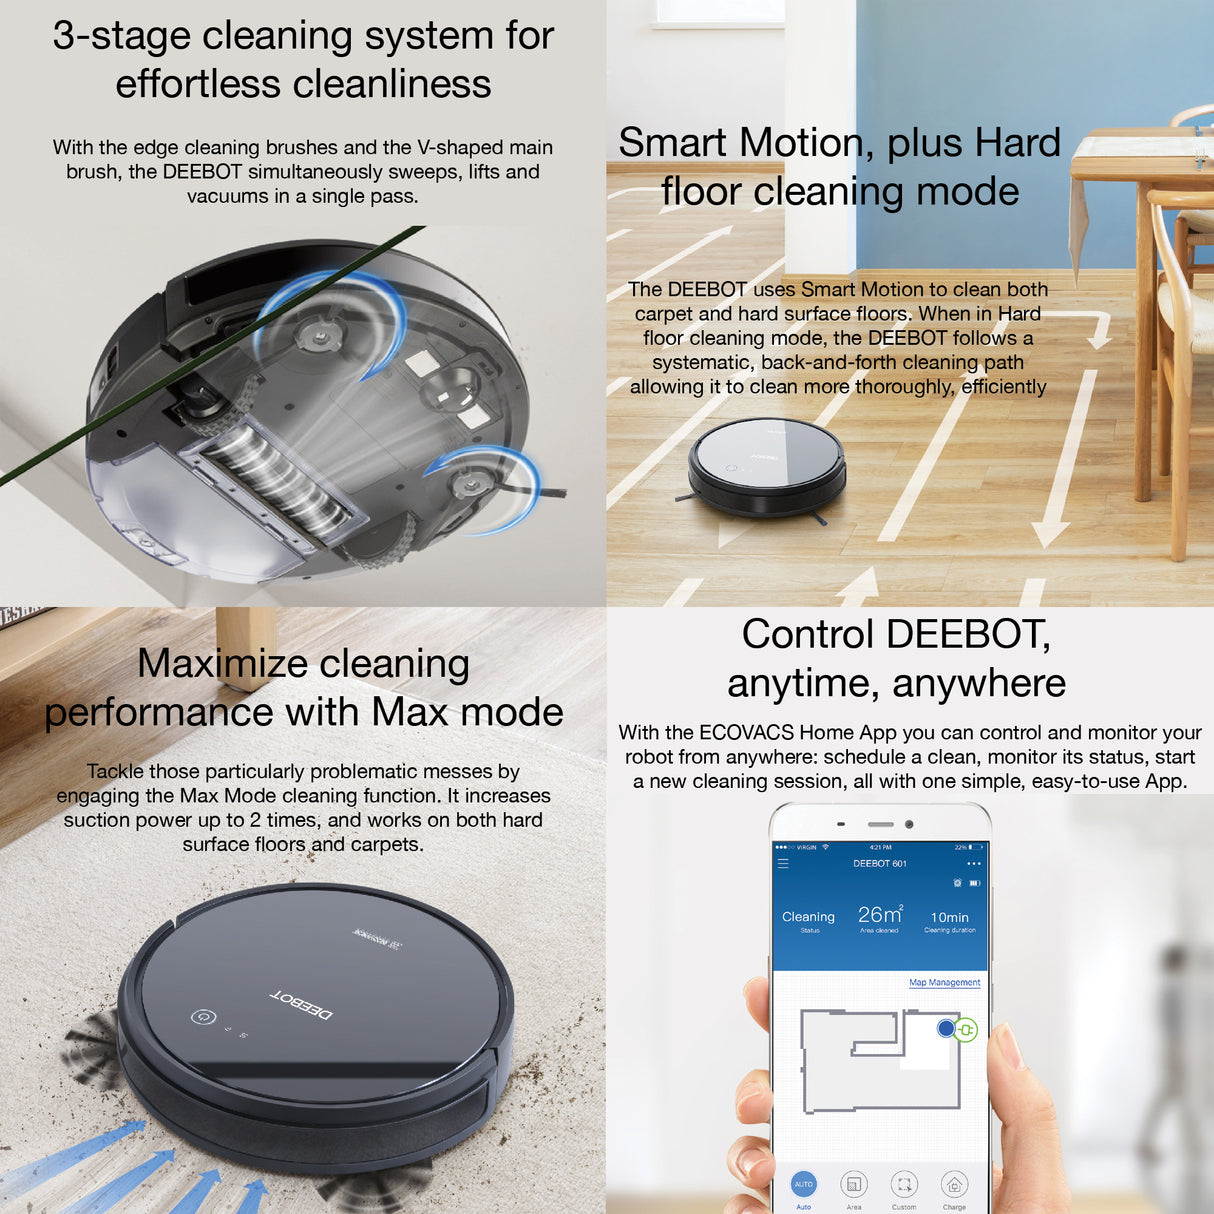 Deebot 601 Robot Vacuum Cleaner - Motion Navigation, 110min Runtime - UNBOXED DEAL